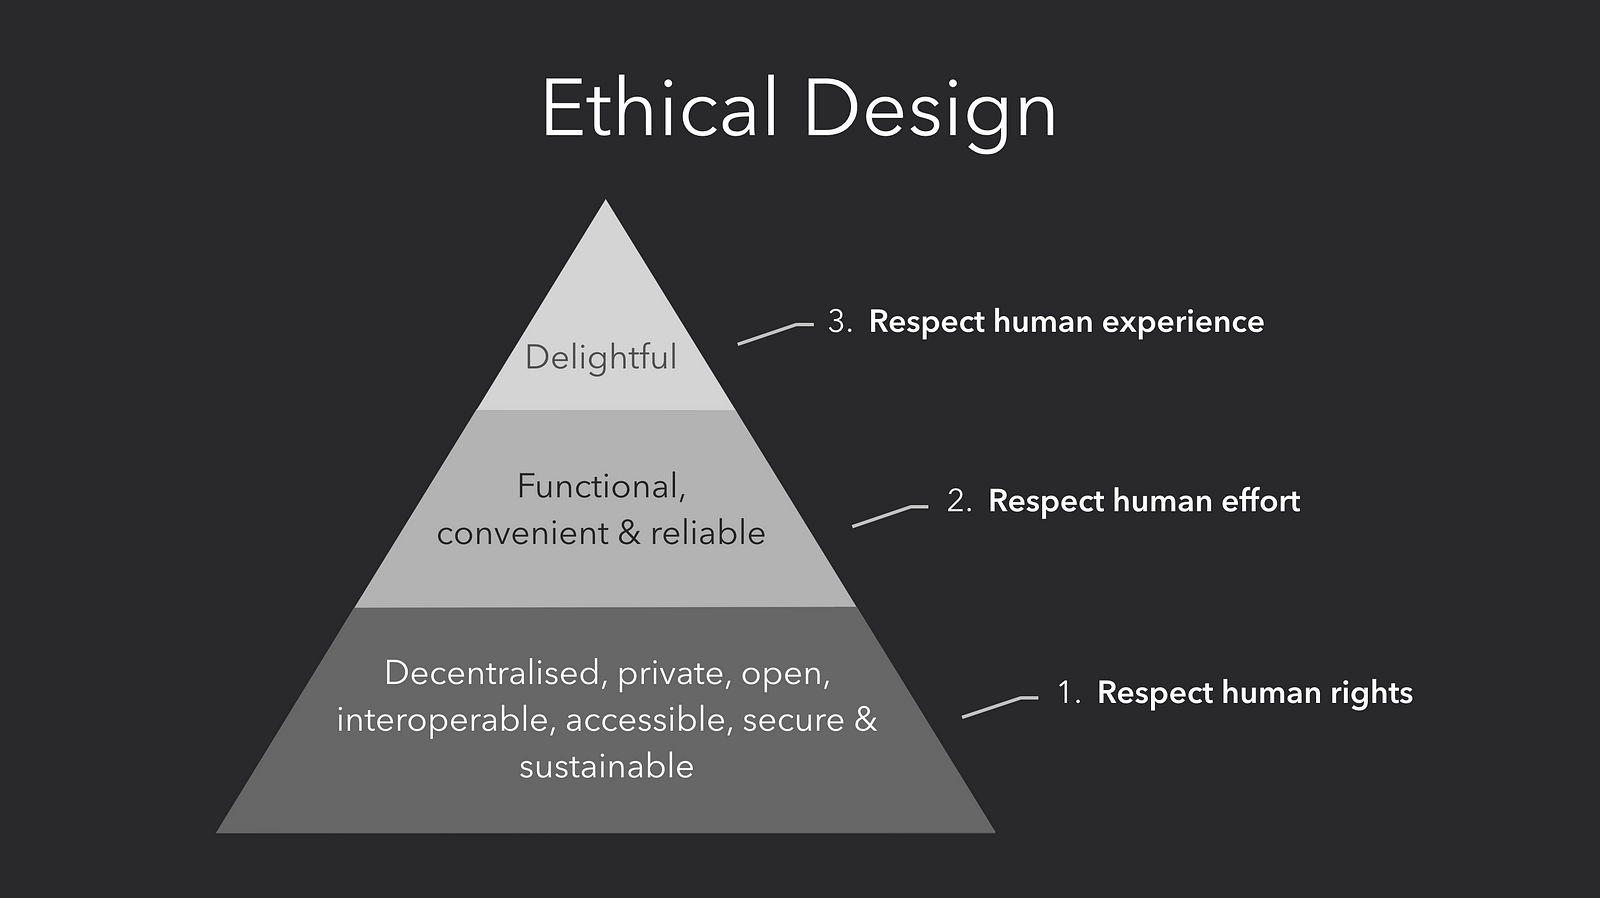 The Role of AI Ethics in Smart Building Design